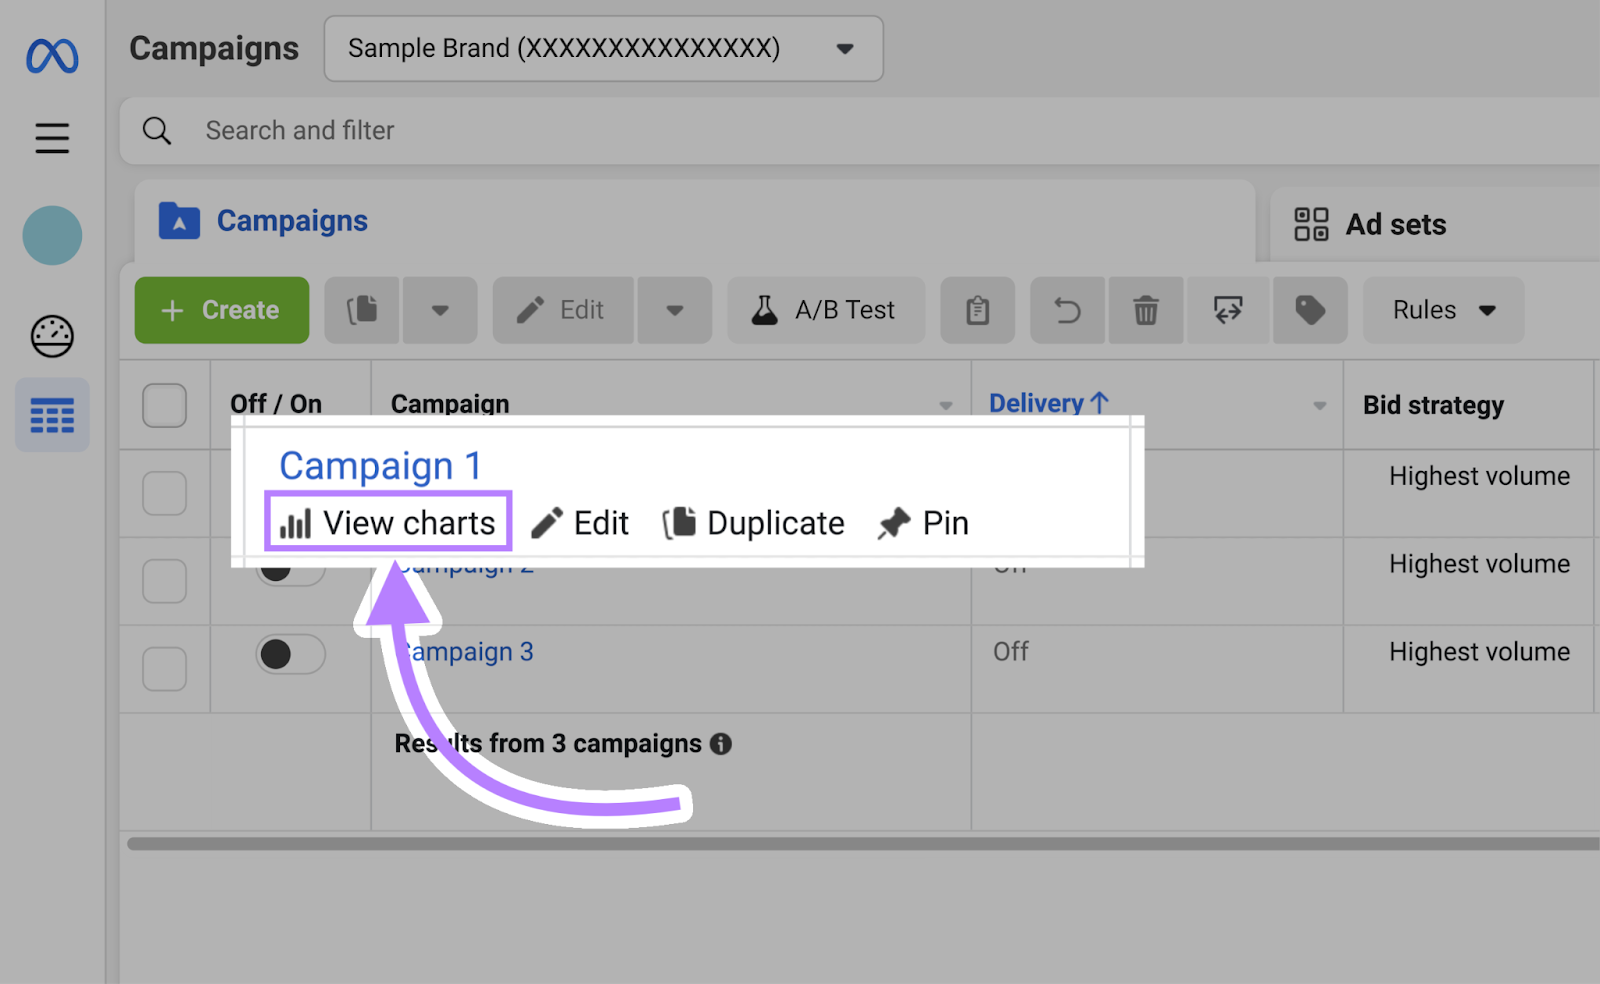 navigating to “View charts” button under "Campaign 1"